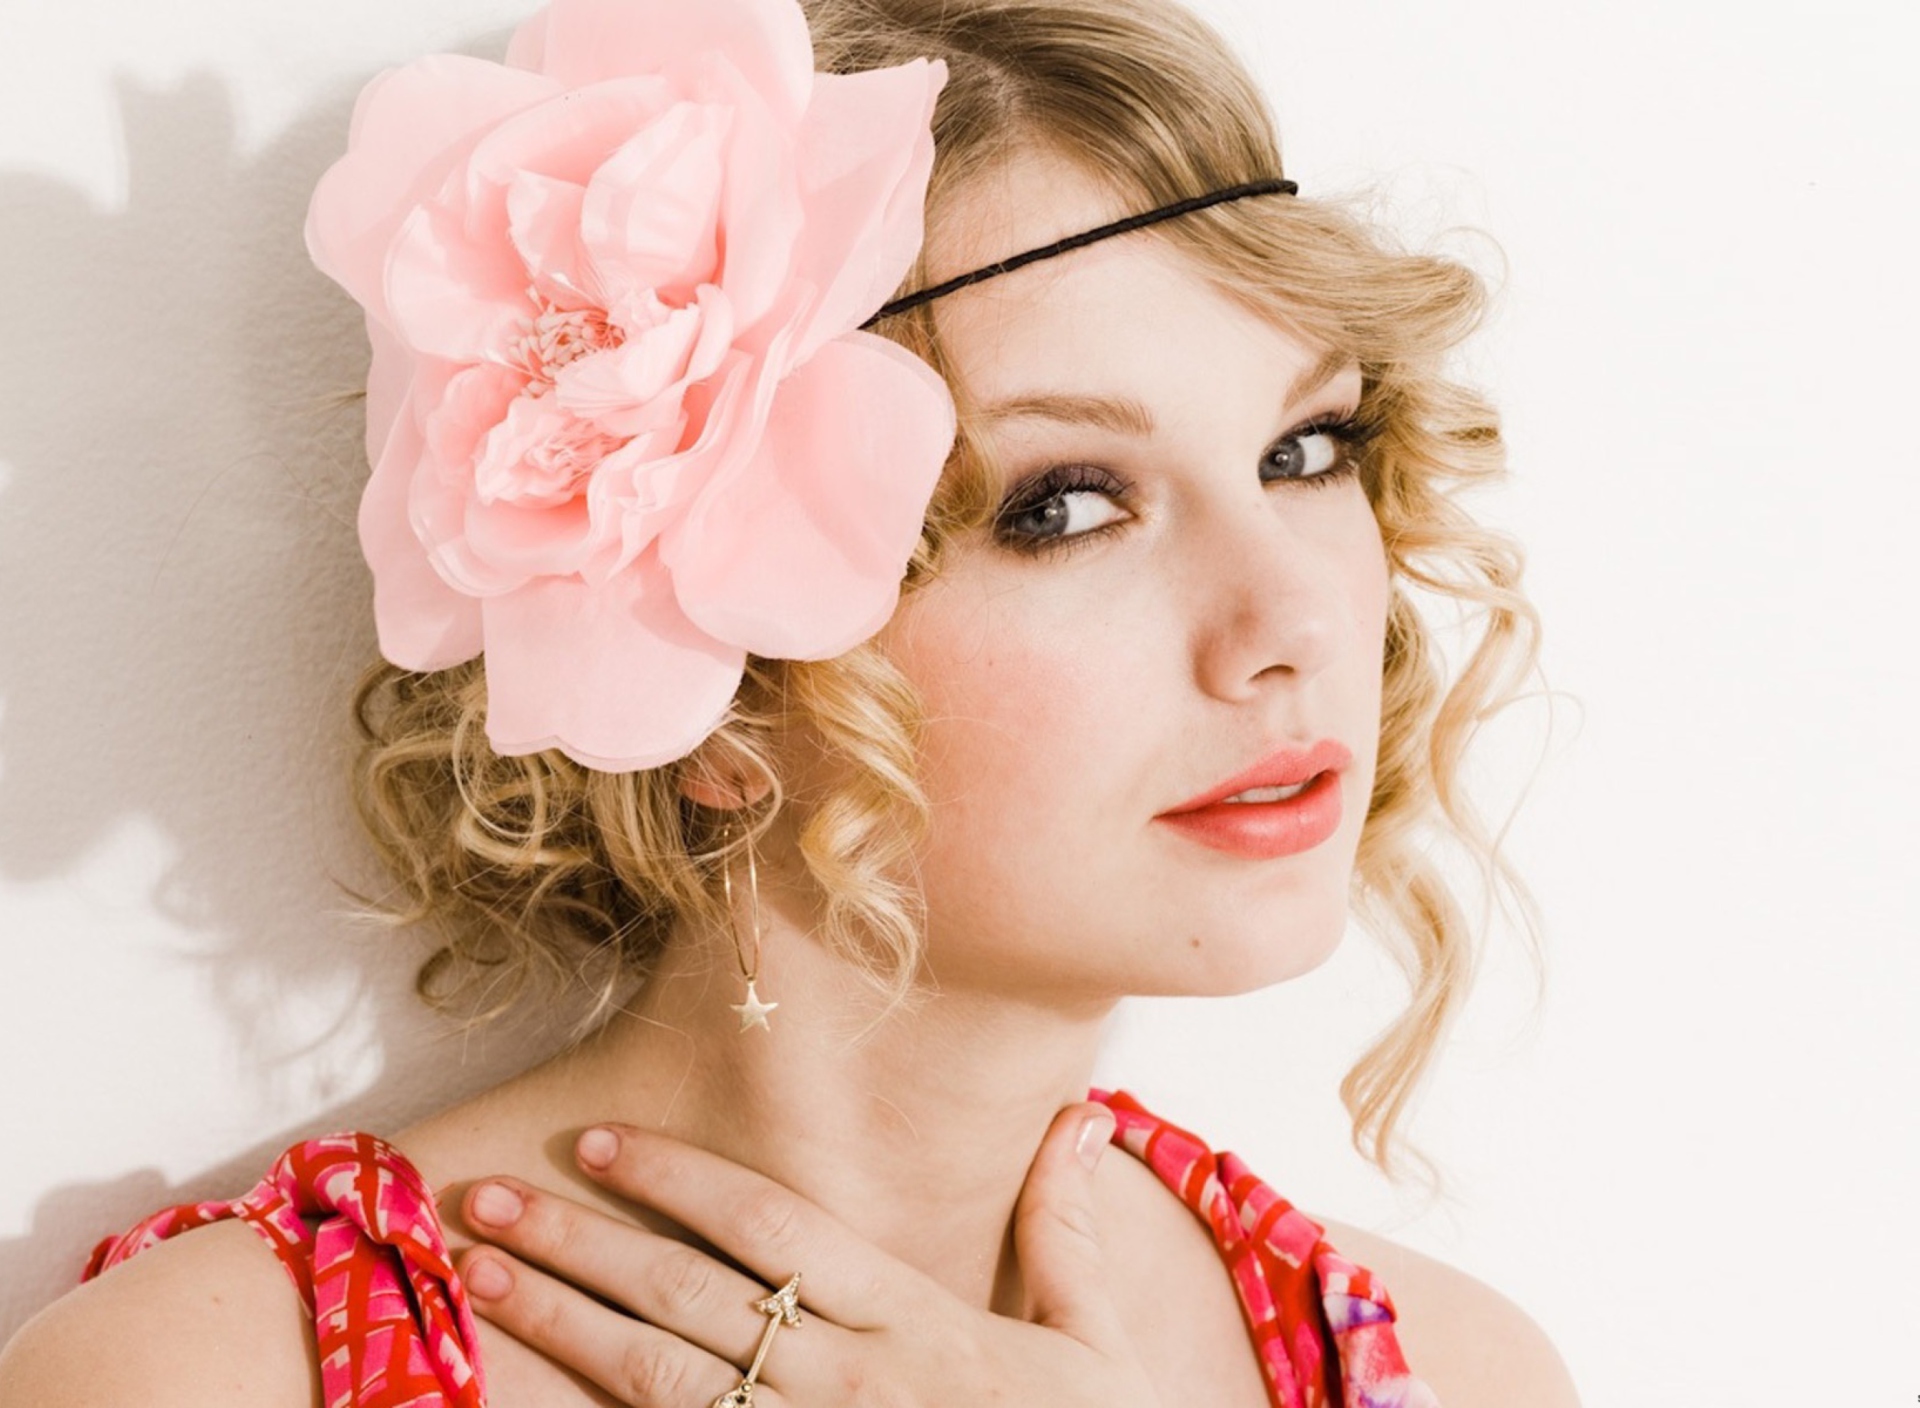 Taylor Swift With Pink Rose On Head wallpaper 1920x1408